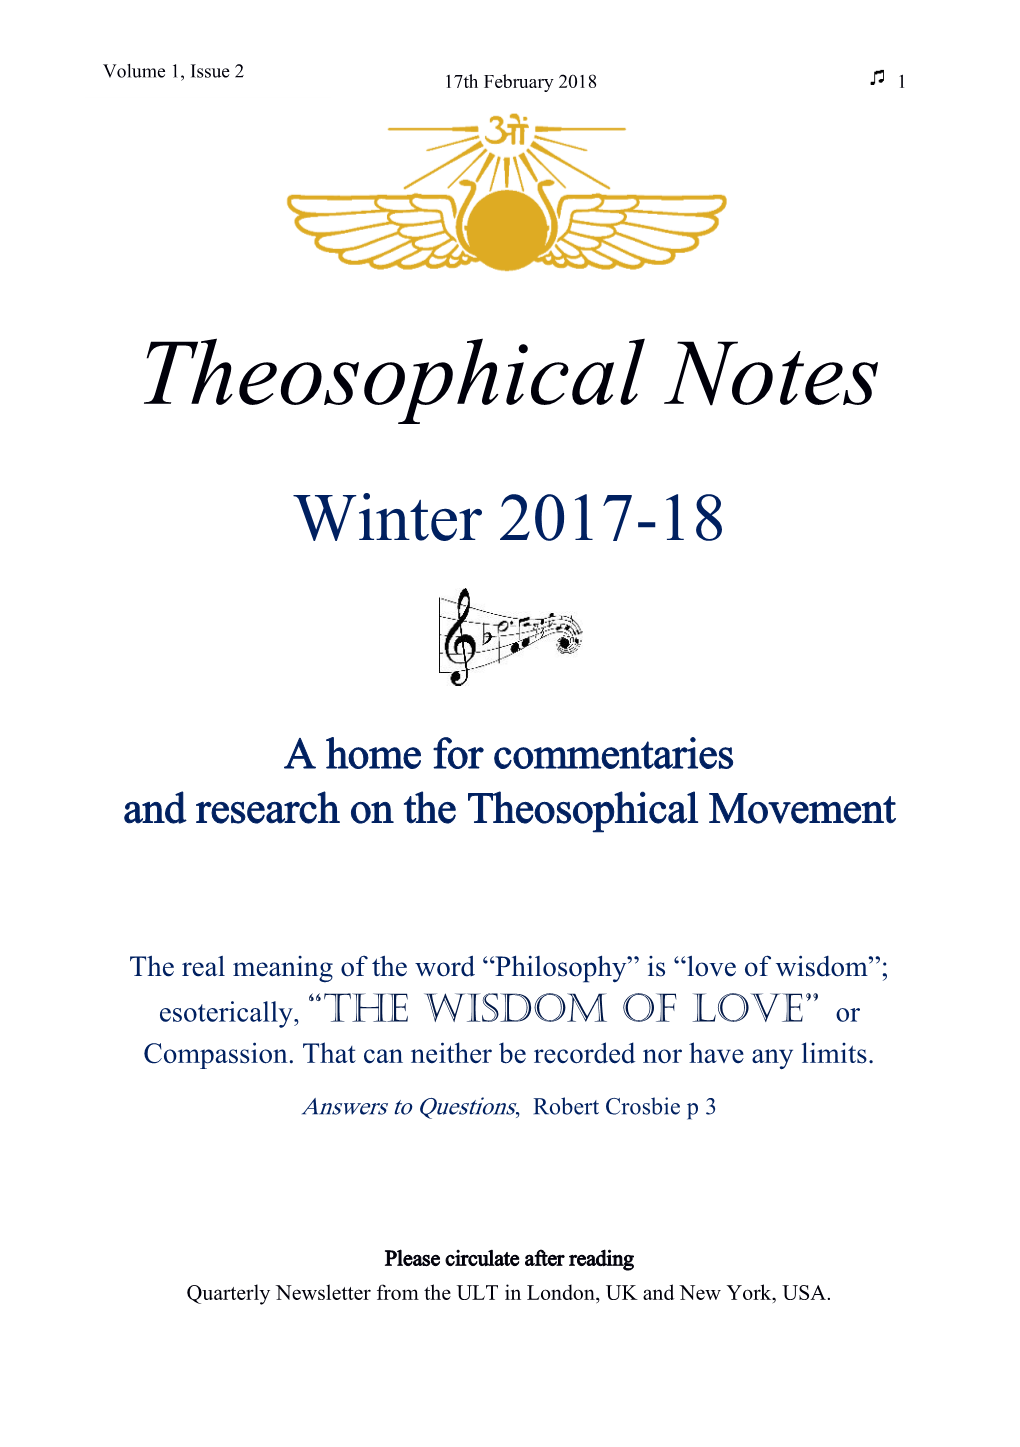 Theosophical Notes Winter 2017-18